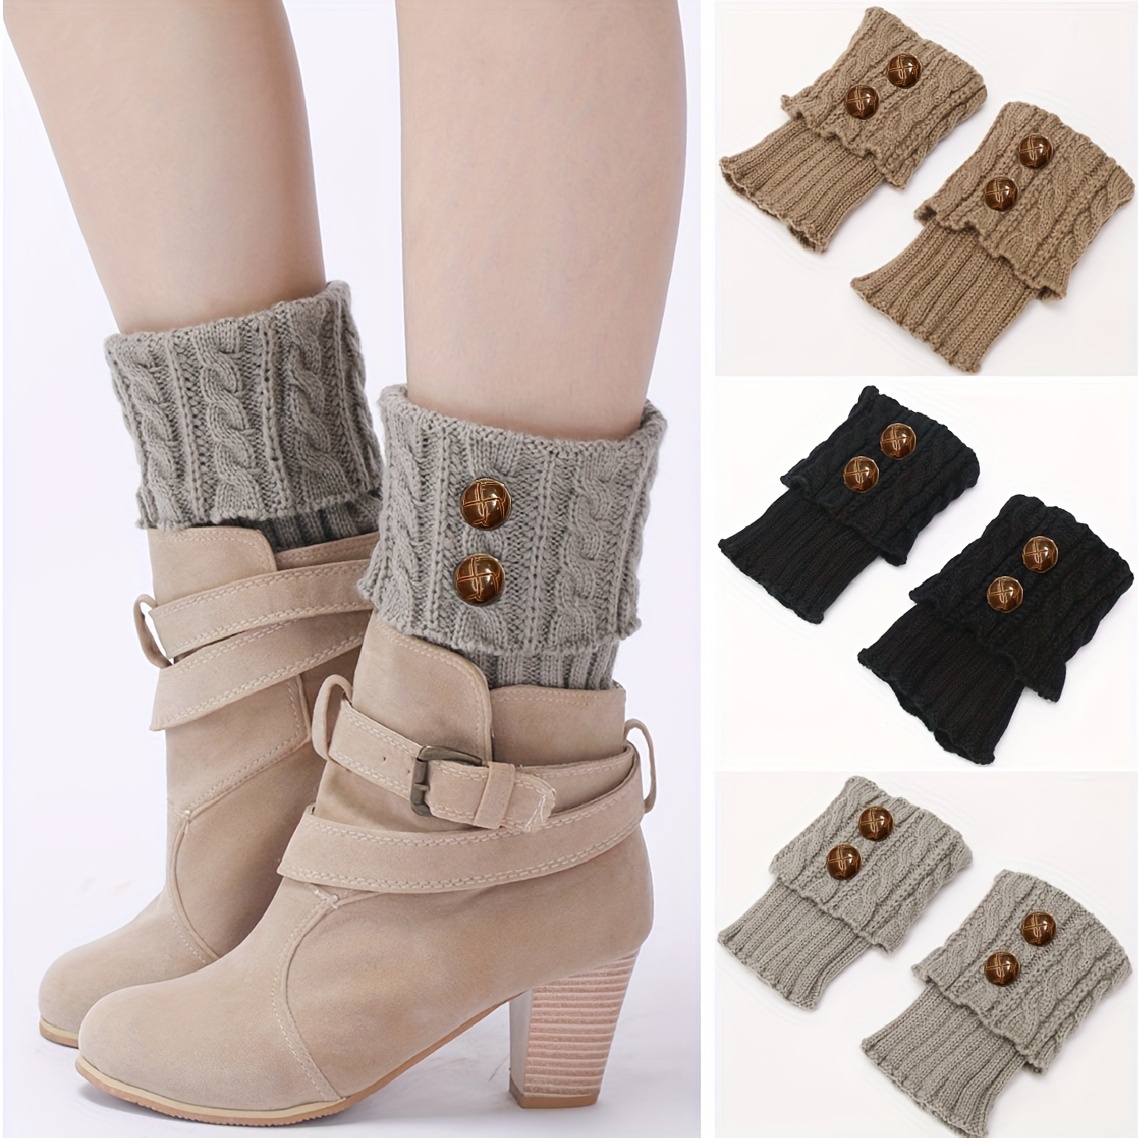 Leg Warmers for Women - Cable Knit Leg Warmers - Knitted Ankle Warmers -  Winter Boot Cuffs for Women - Warm Calf Leg Warmers